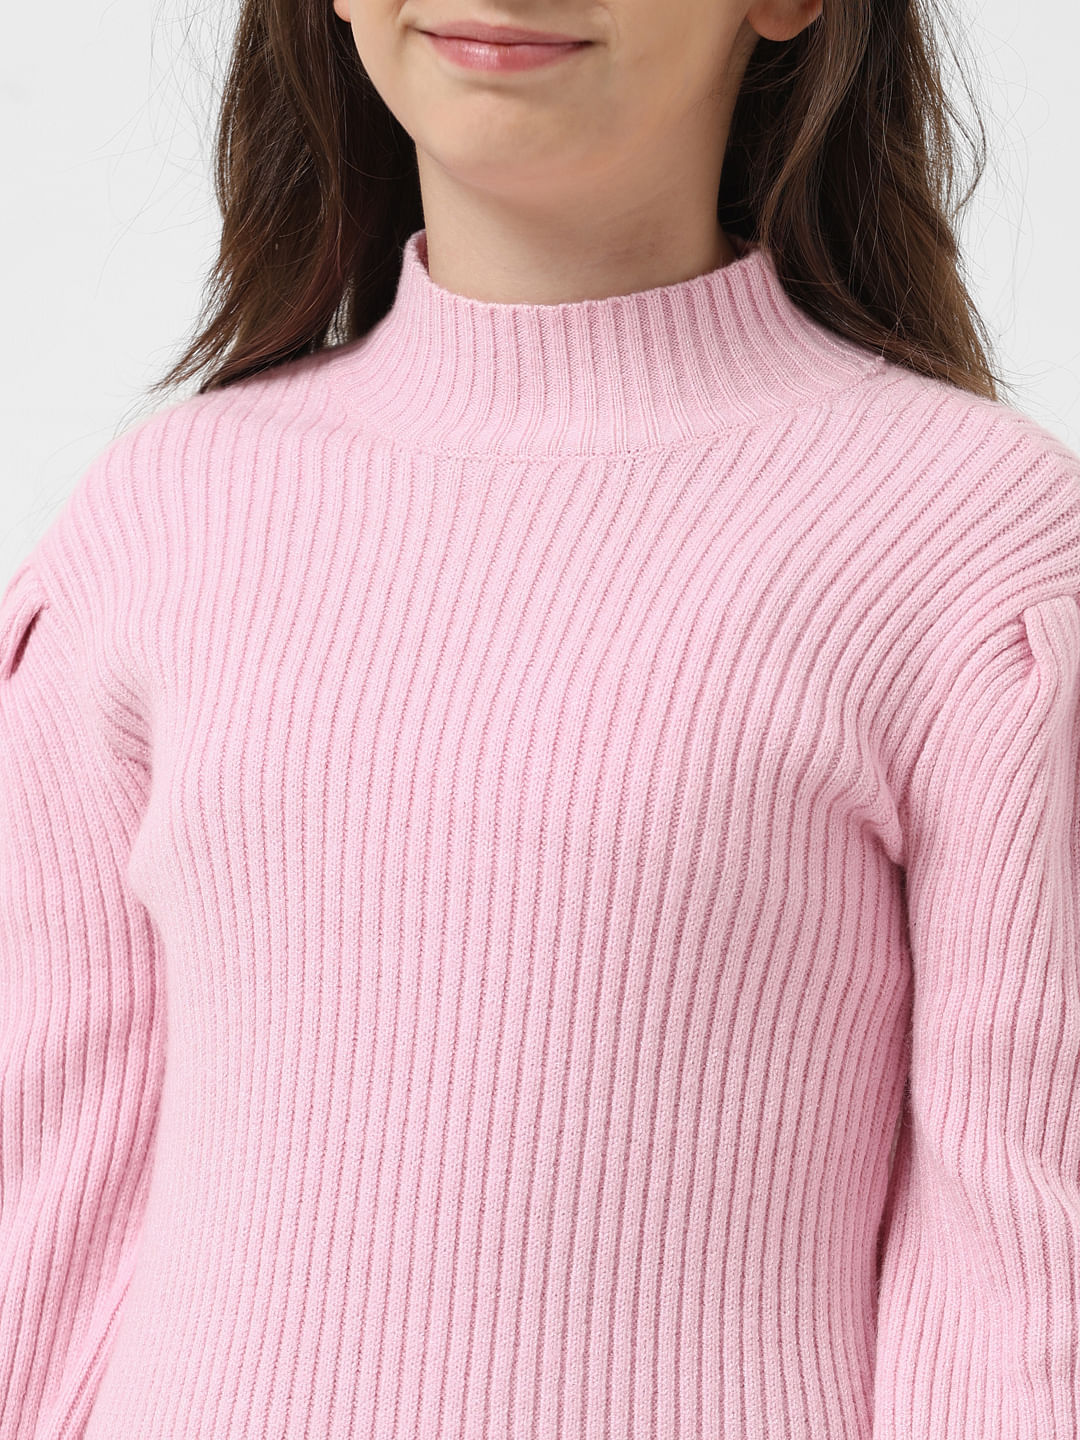 Why You Need a Pink Sweater Dress - House of Illusions